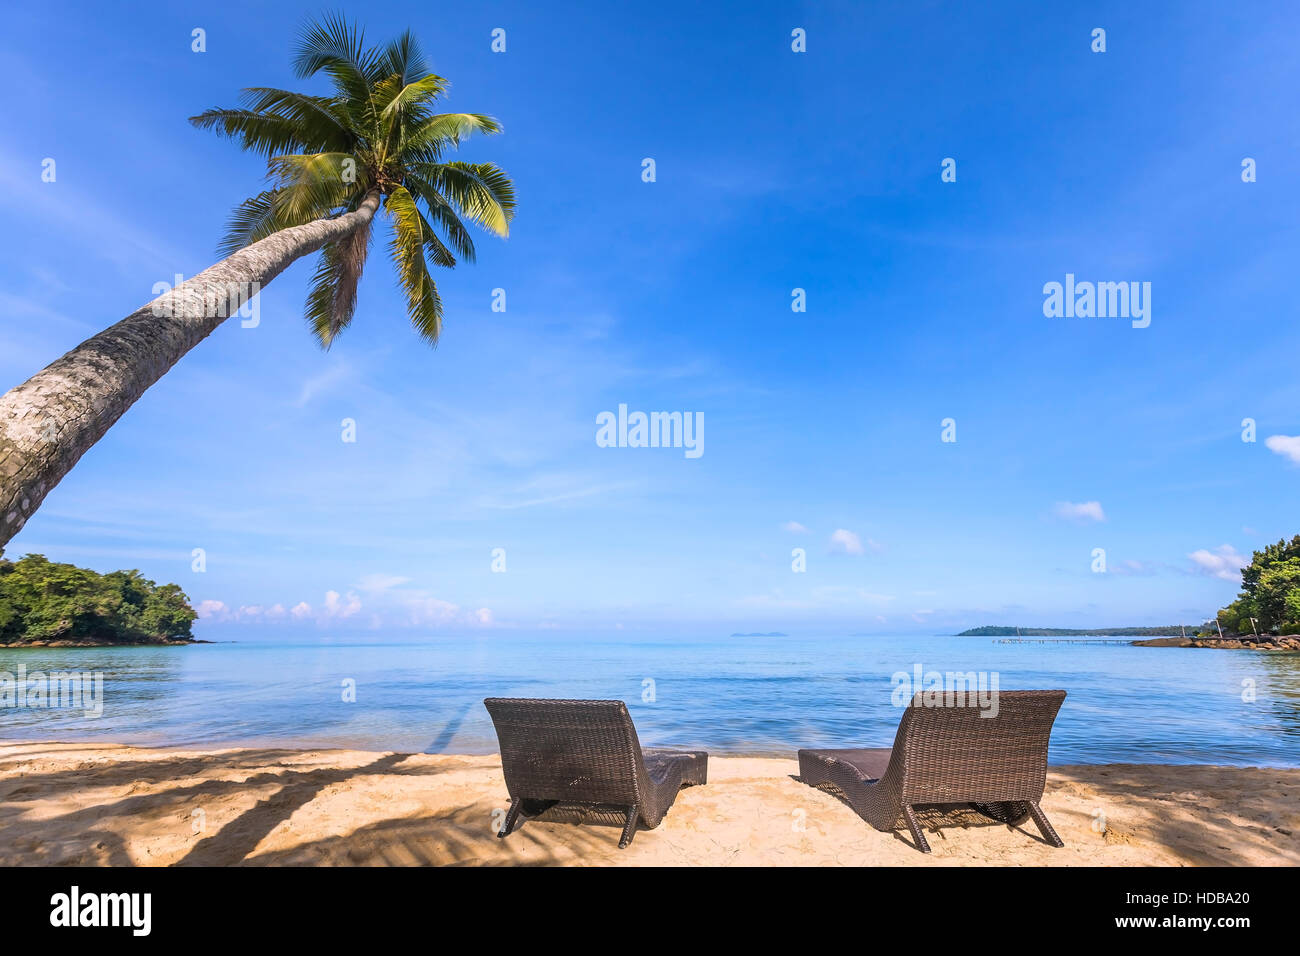 Paradise tropical beach with a beautiful palm tree and two deckchairs on the sand, relaxing holidays Stock Photo